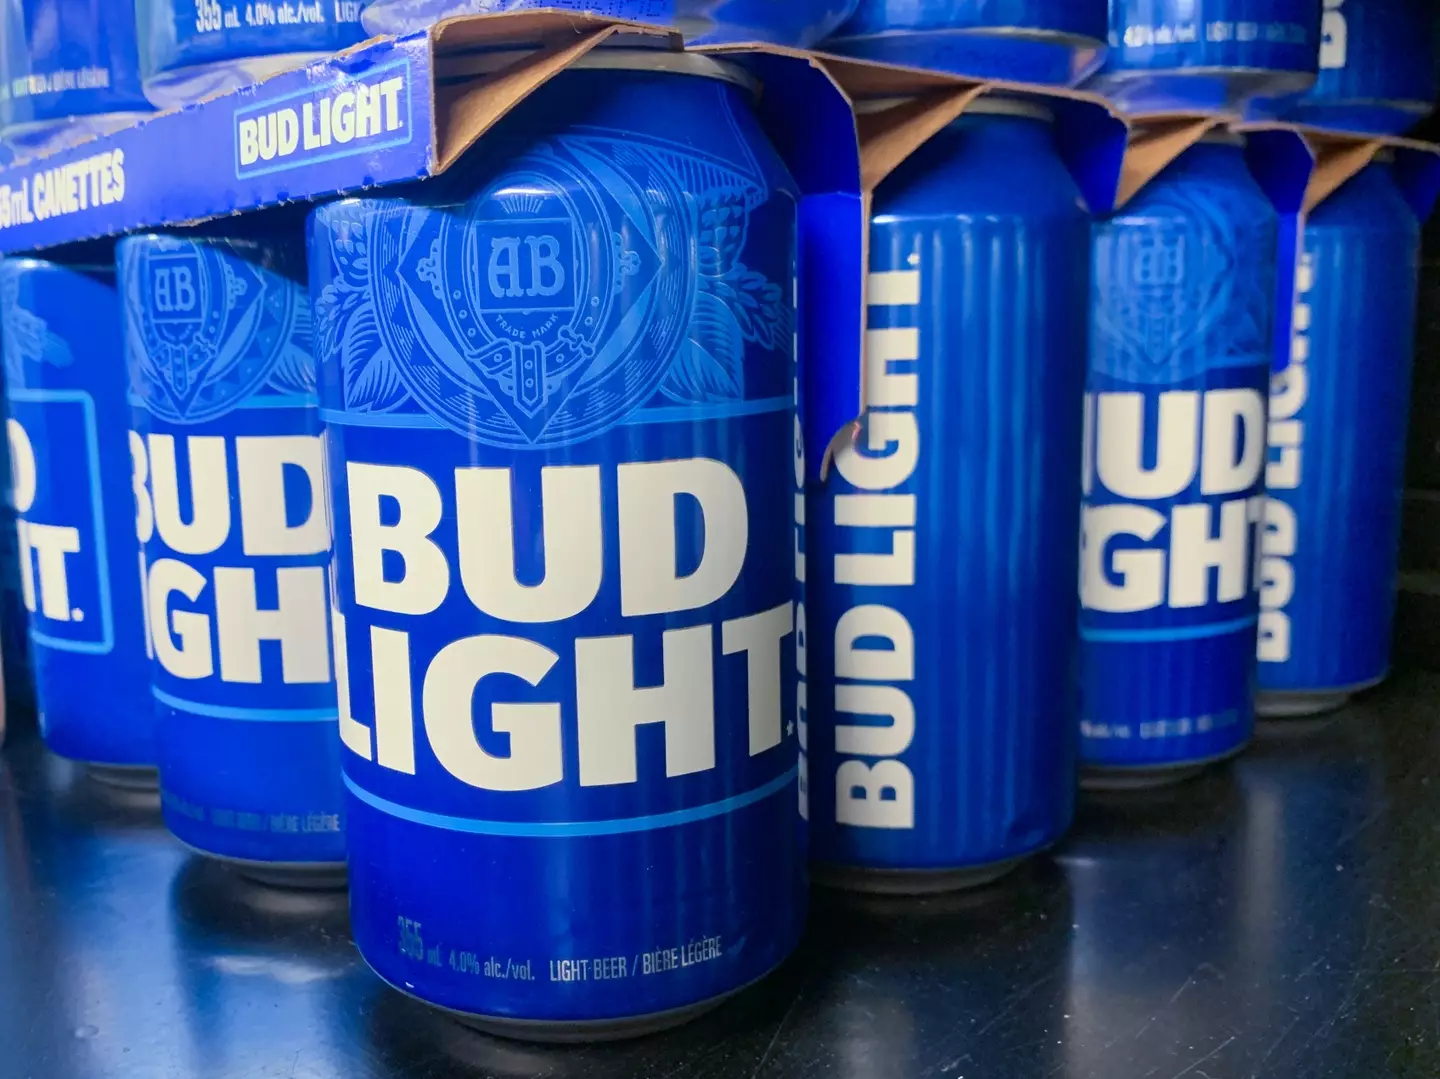 Approval of Bud Light is unchanged, but some of their competitors have shuffled forwards.